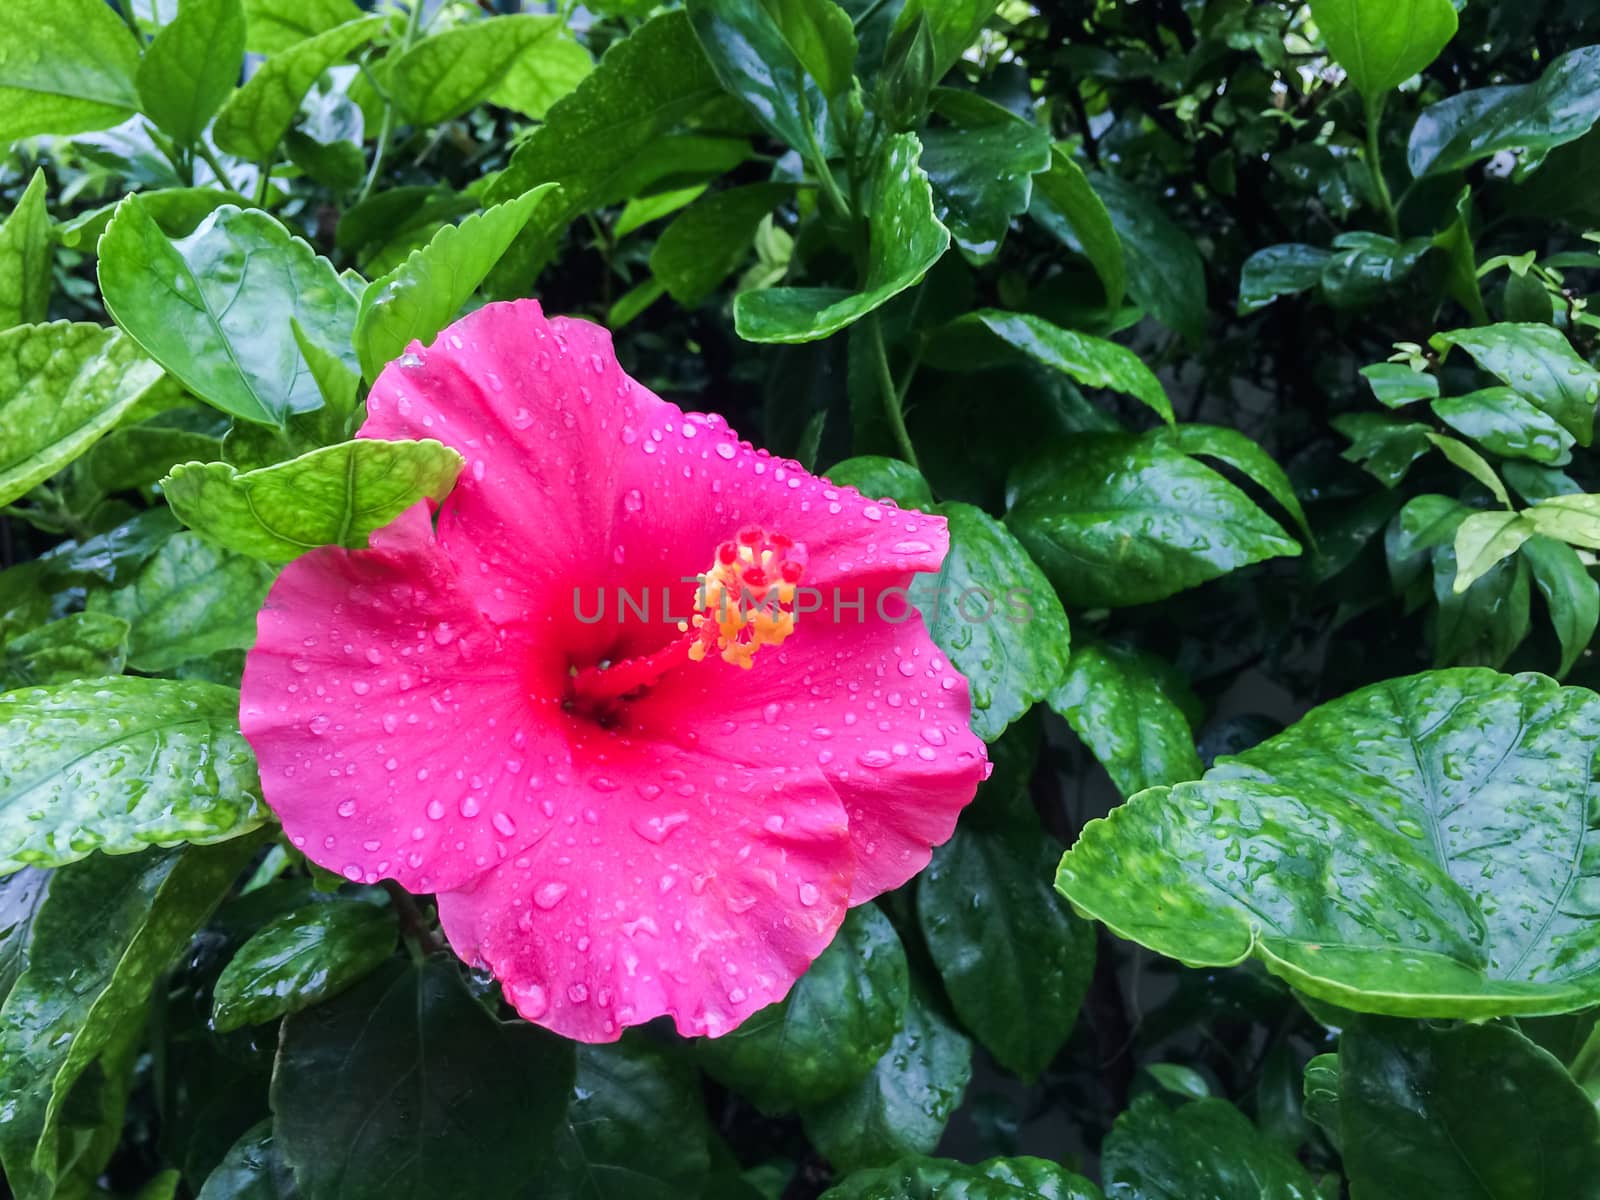 Pink Hibiscus flower is blossom on green leaf color background which has a drop of water on the petals.